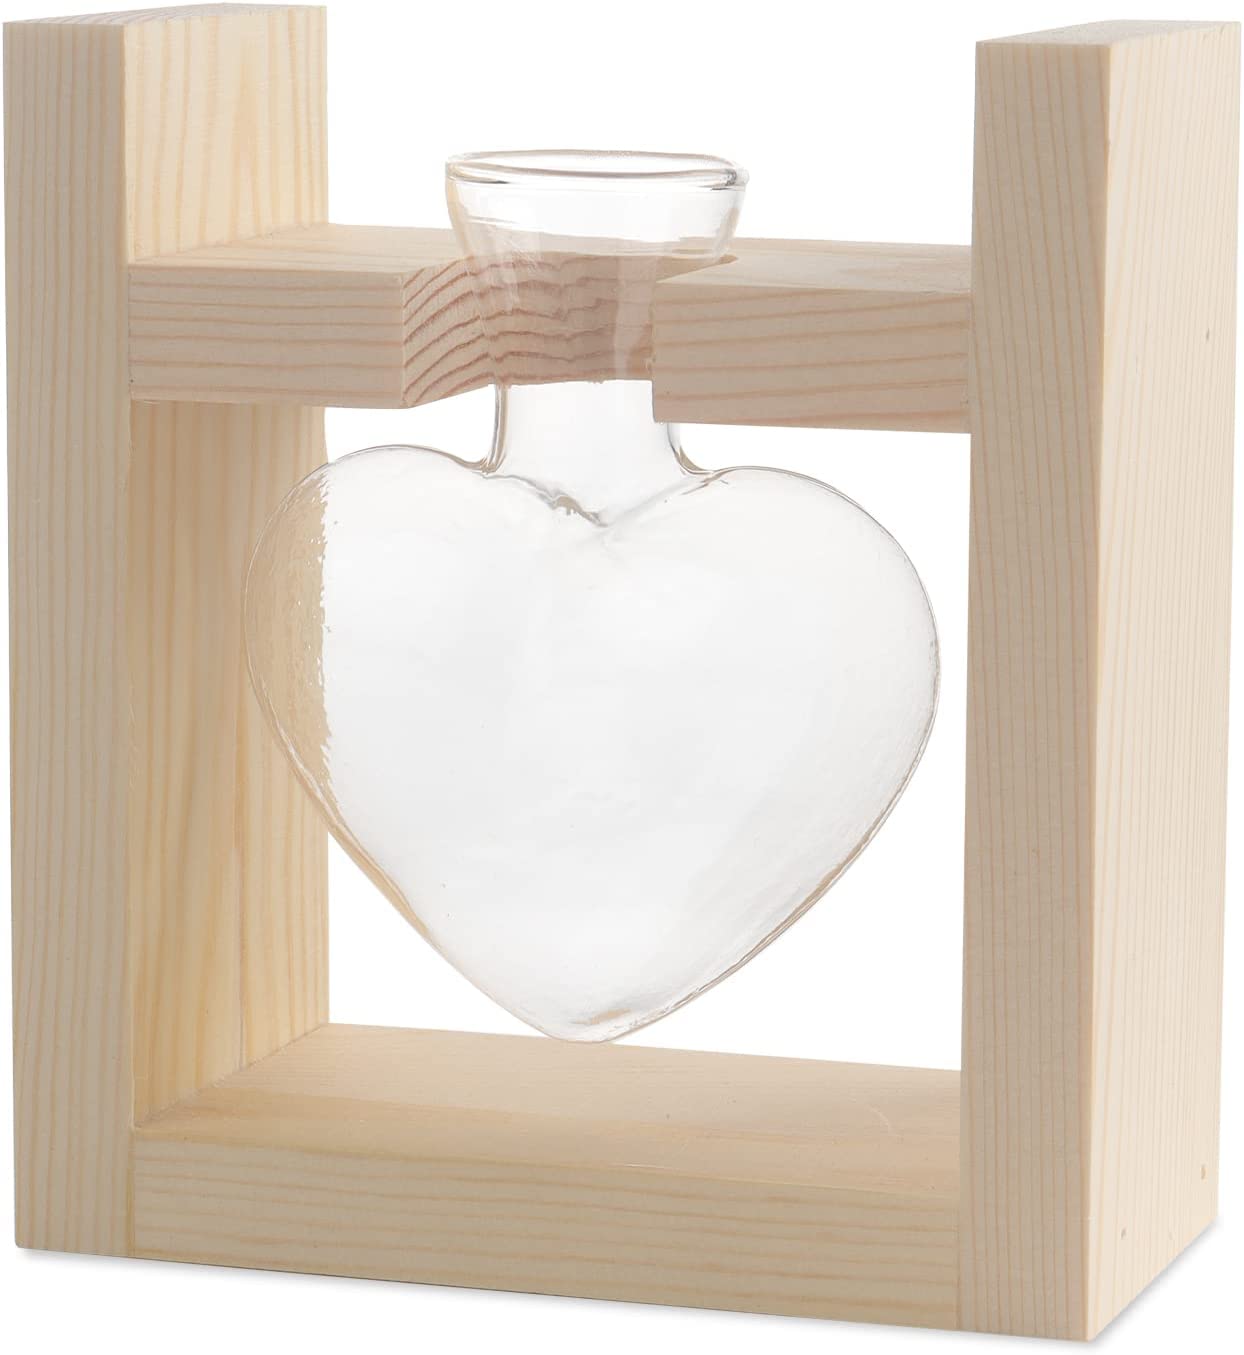 Heart shaped table top clear glass vase